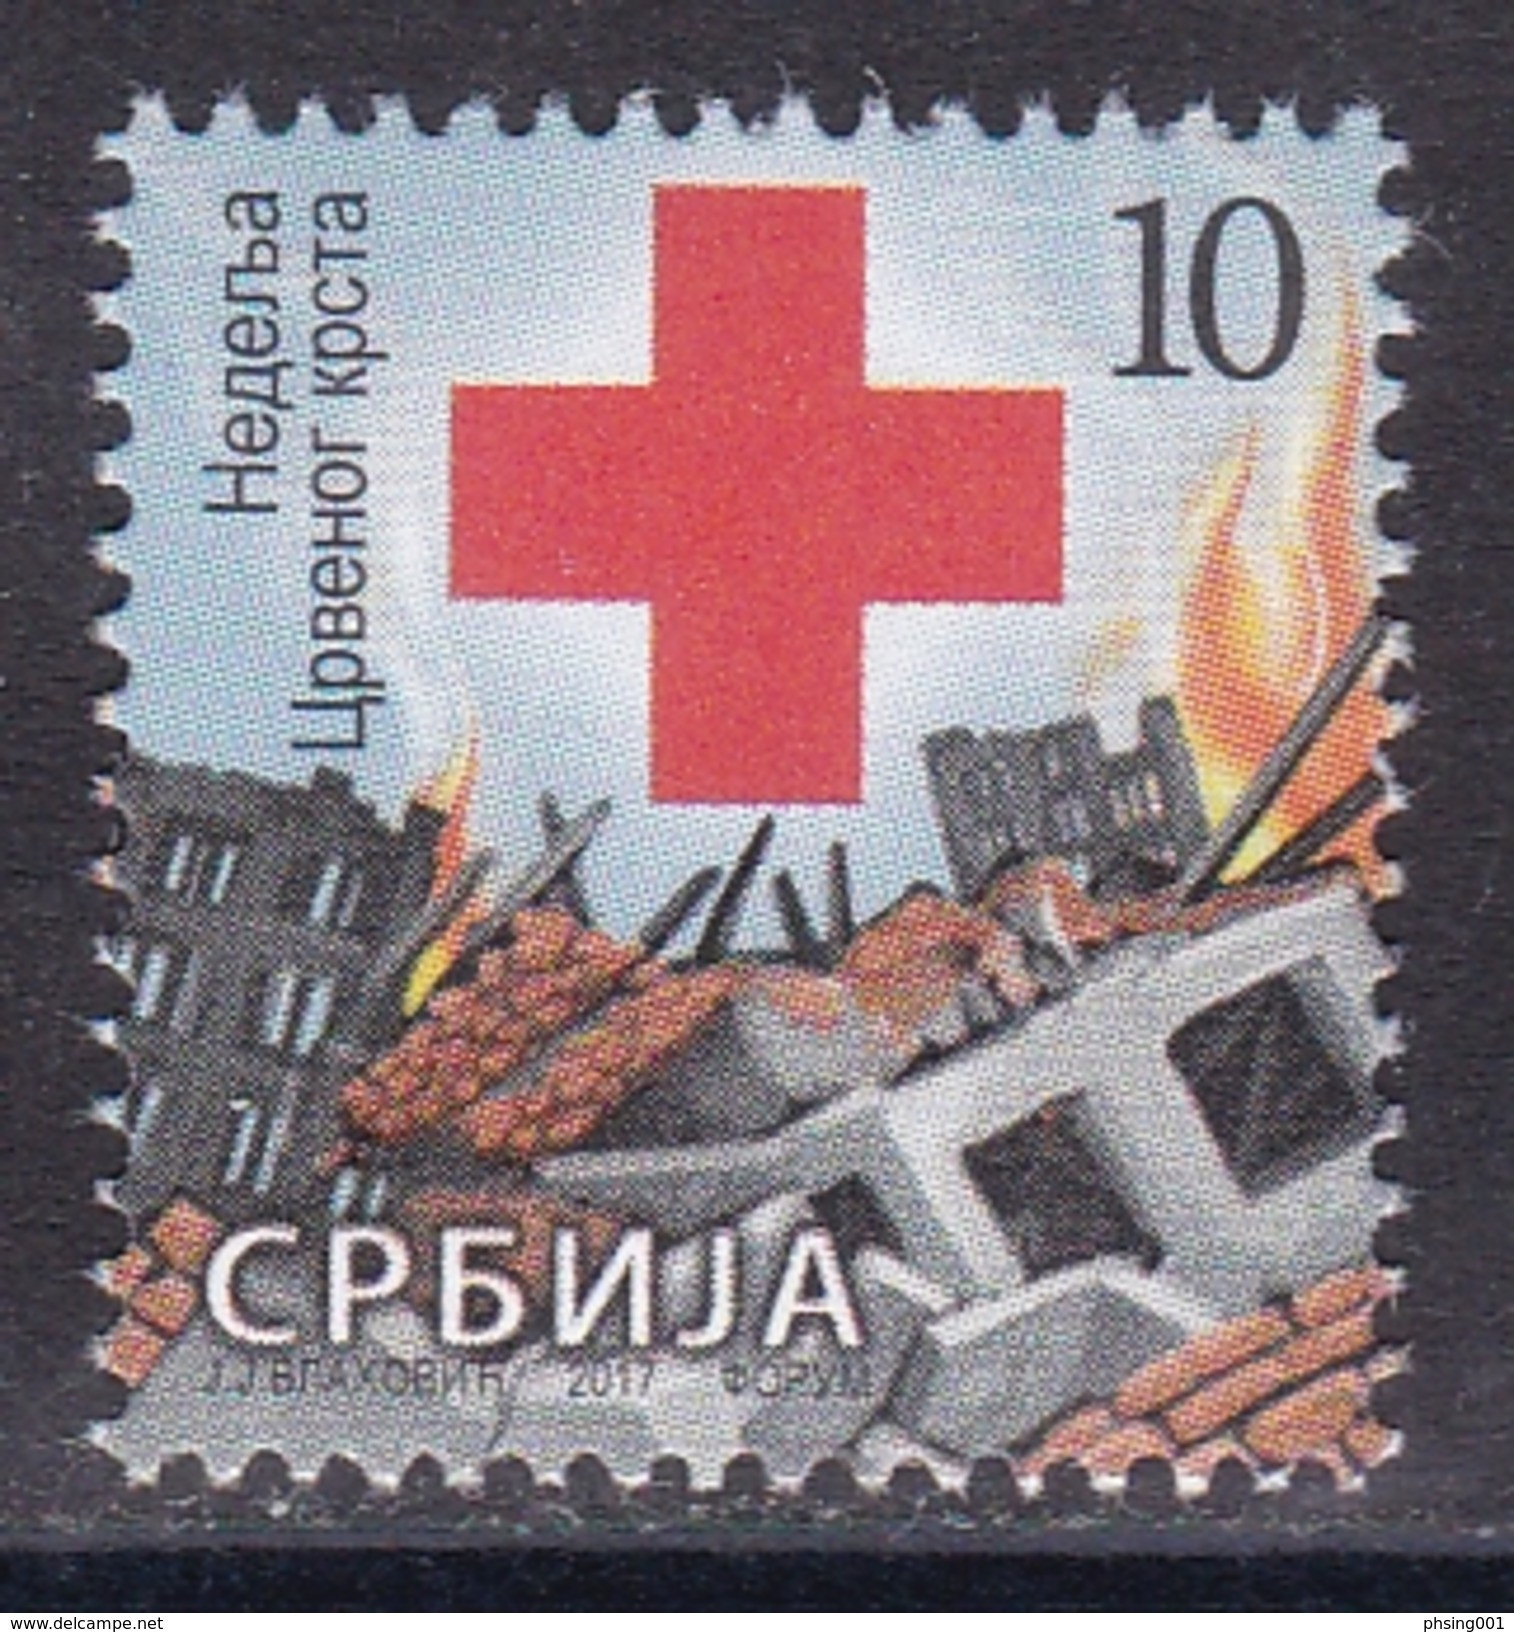 Serbia 2017 Red Cross Rotes Kreuz Croix Rouge, Tax, Charity, Surcharge MNH - Serbie